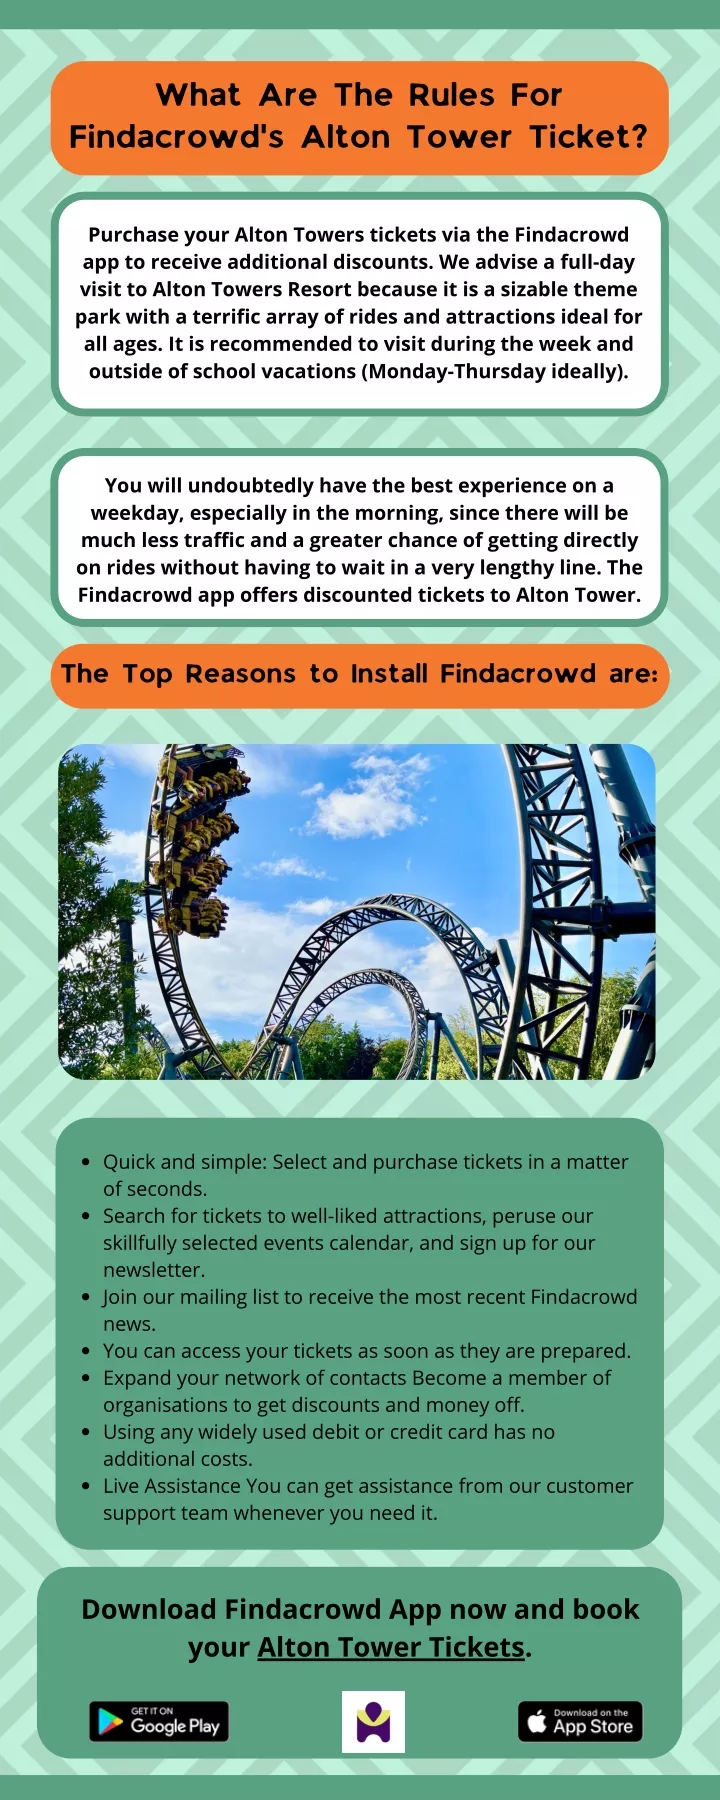 PPT - What Are The Rules For Findacrowd's Alton Tower Ticket ...